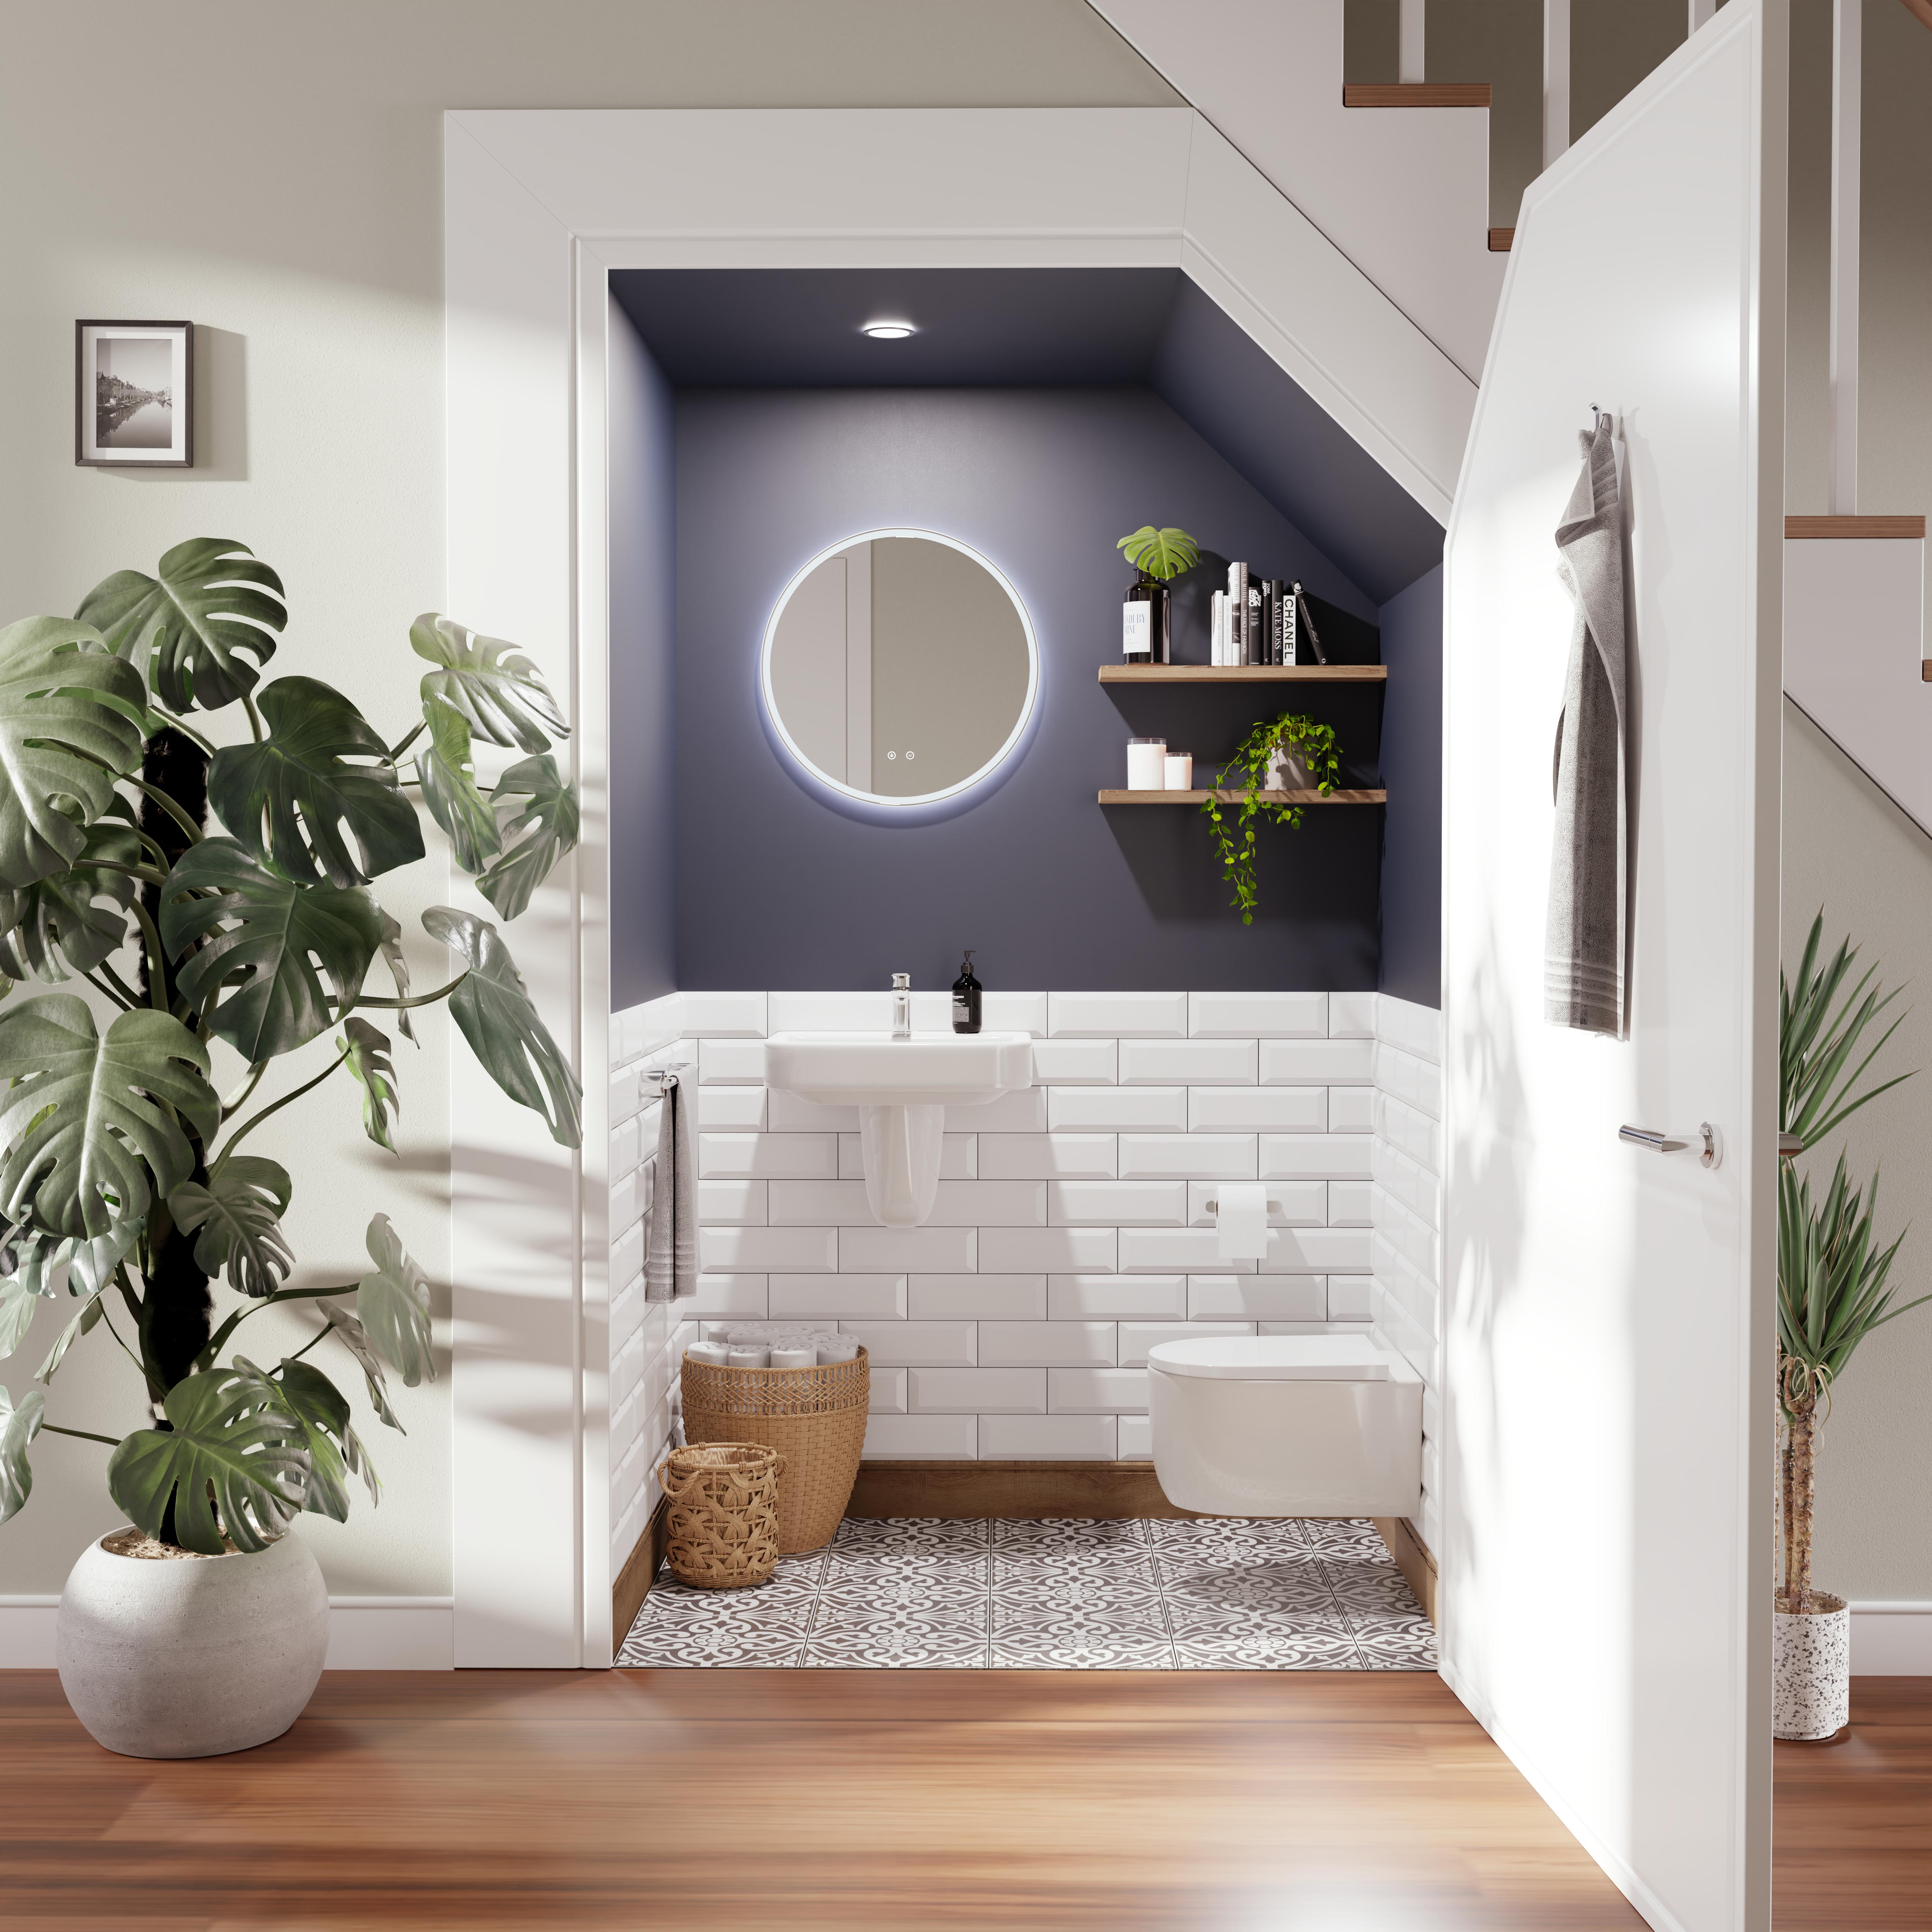 Cloakroom bathroom under the stairs 